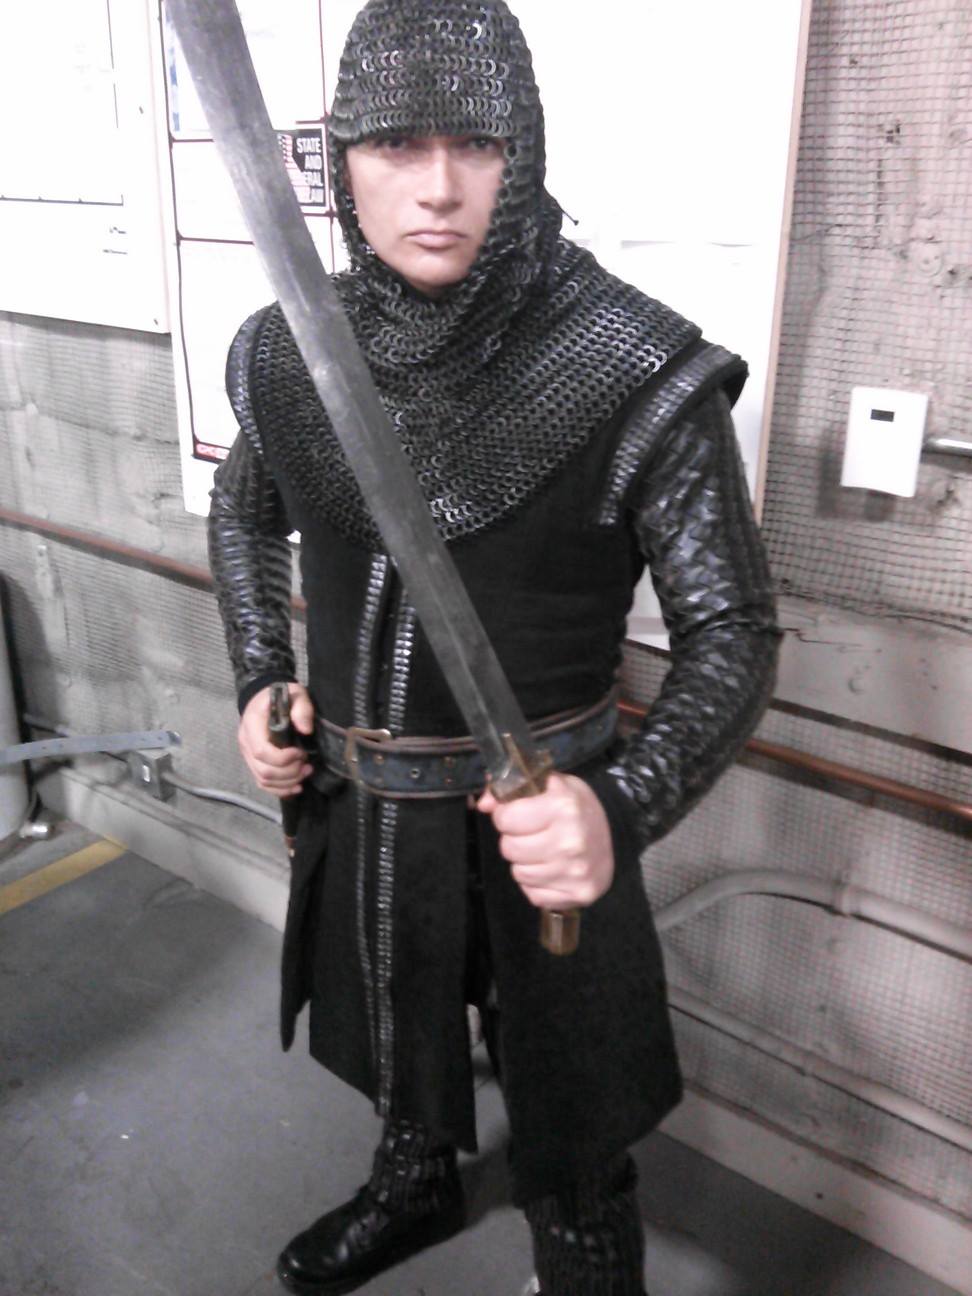 Played a Knight in another Chris Brown music video Ft Ariana Grande.